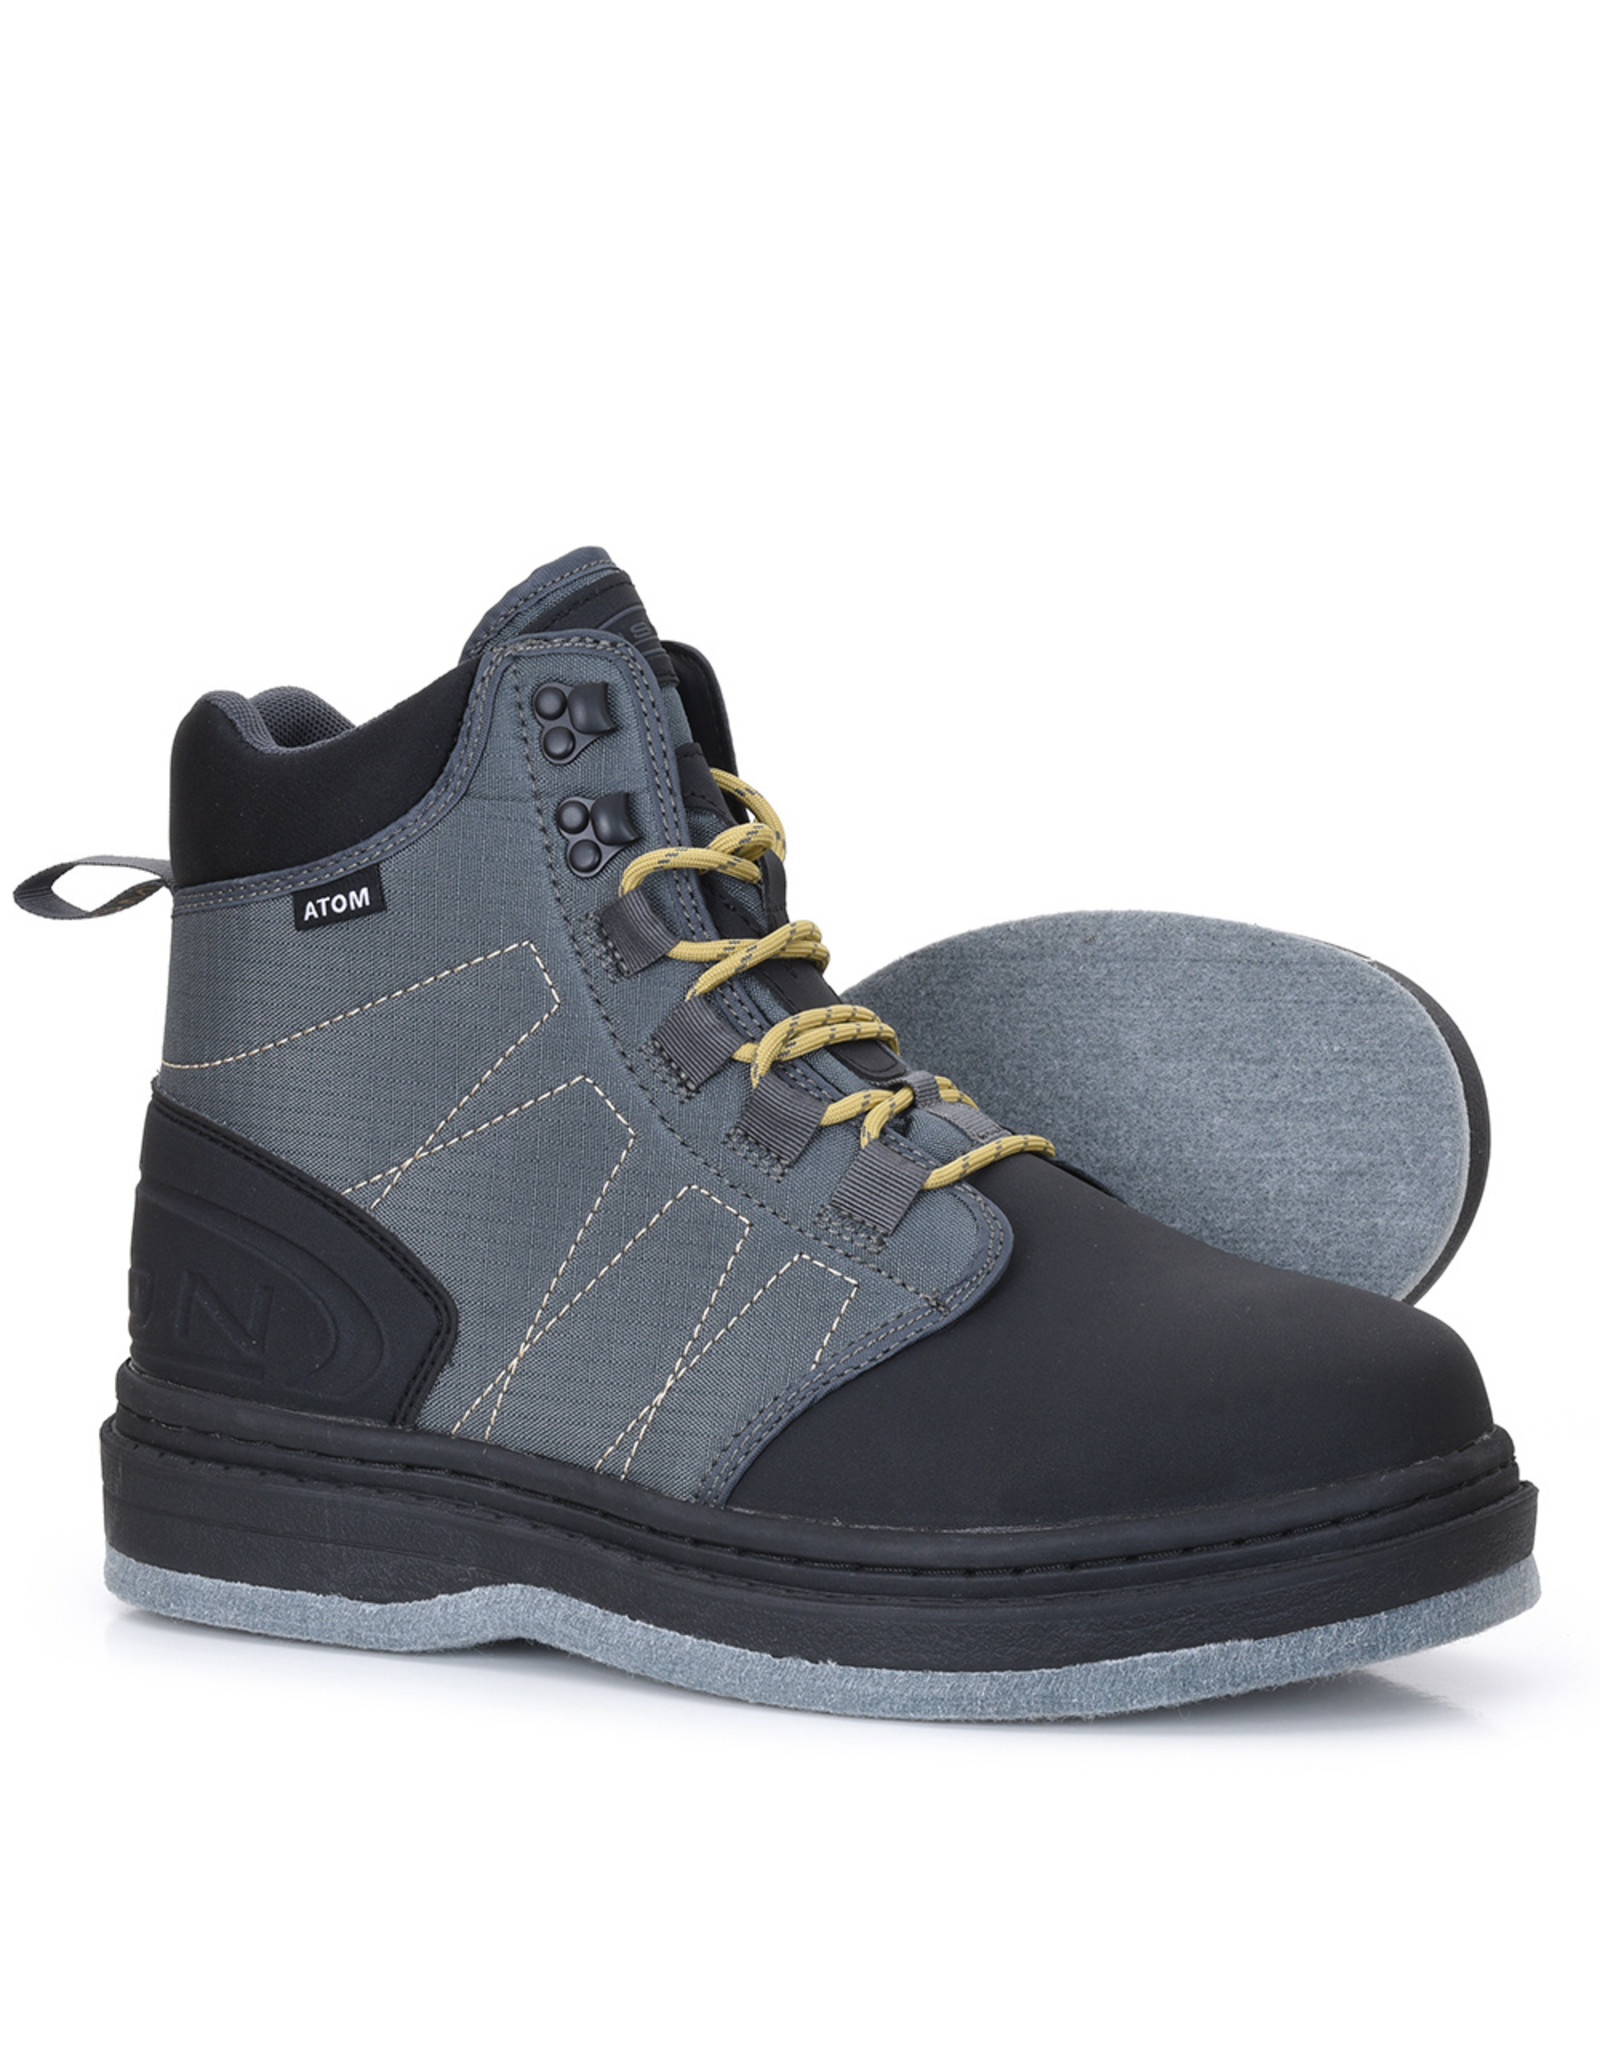 VISION FLY FISHING ATOM FELT SOLE WADING BOOTS